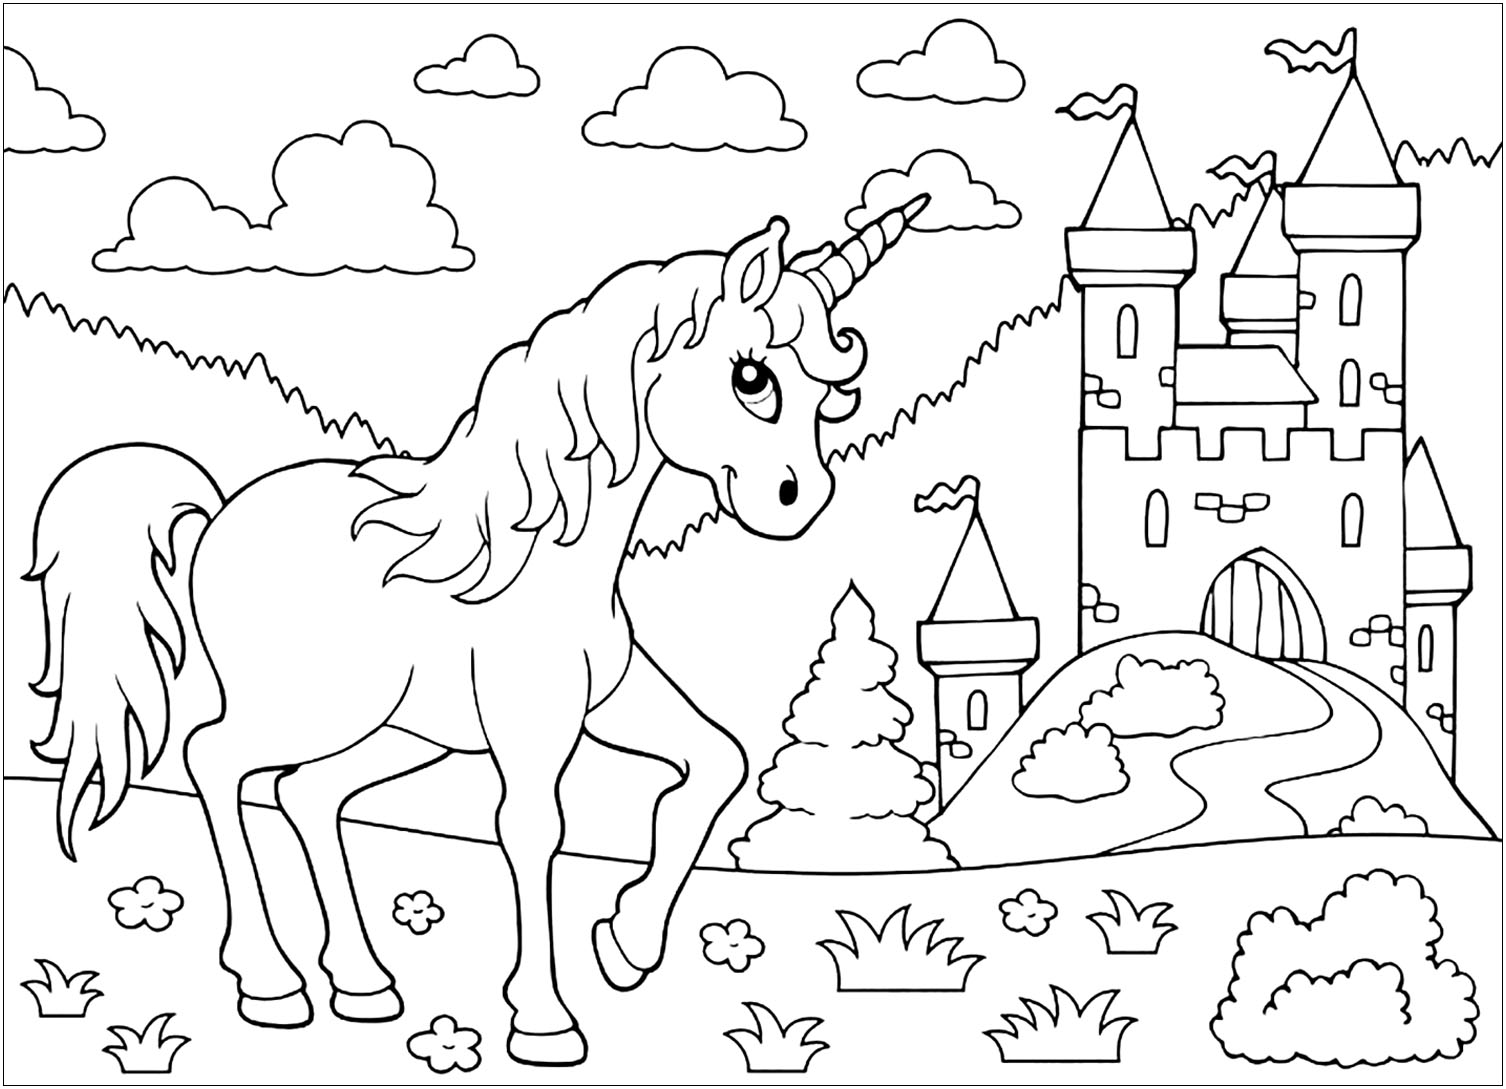 Download Unicorns free to color for kids - Unicorns Kids Coloring Pages